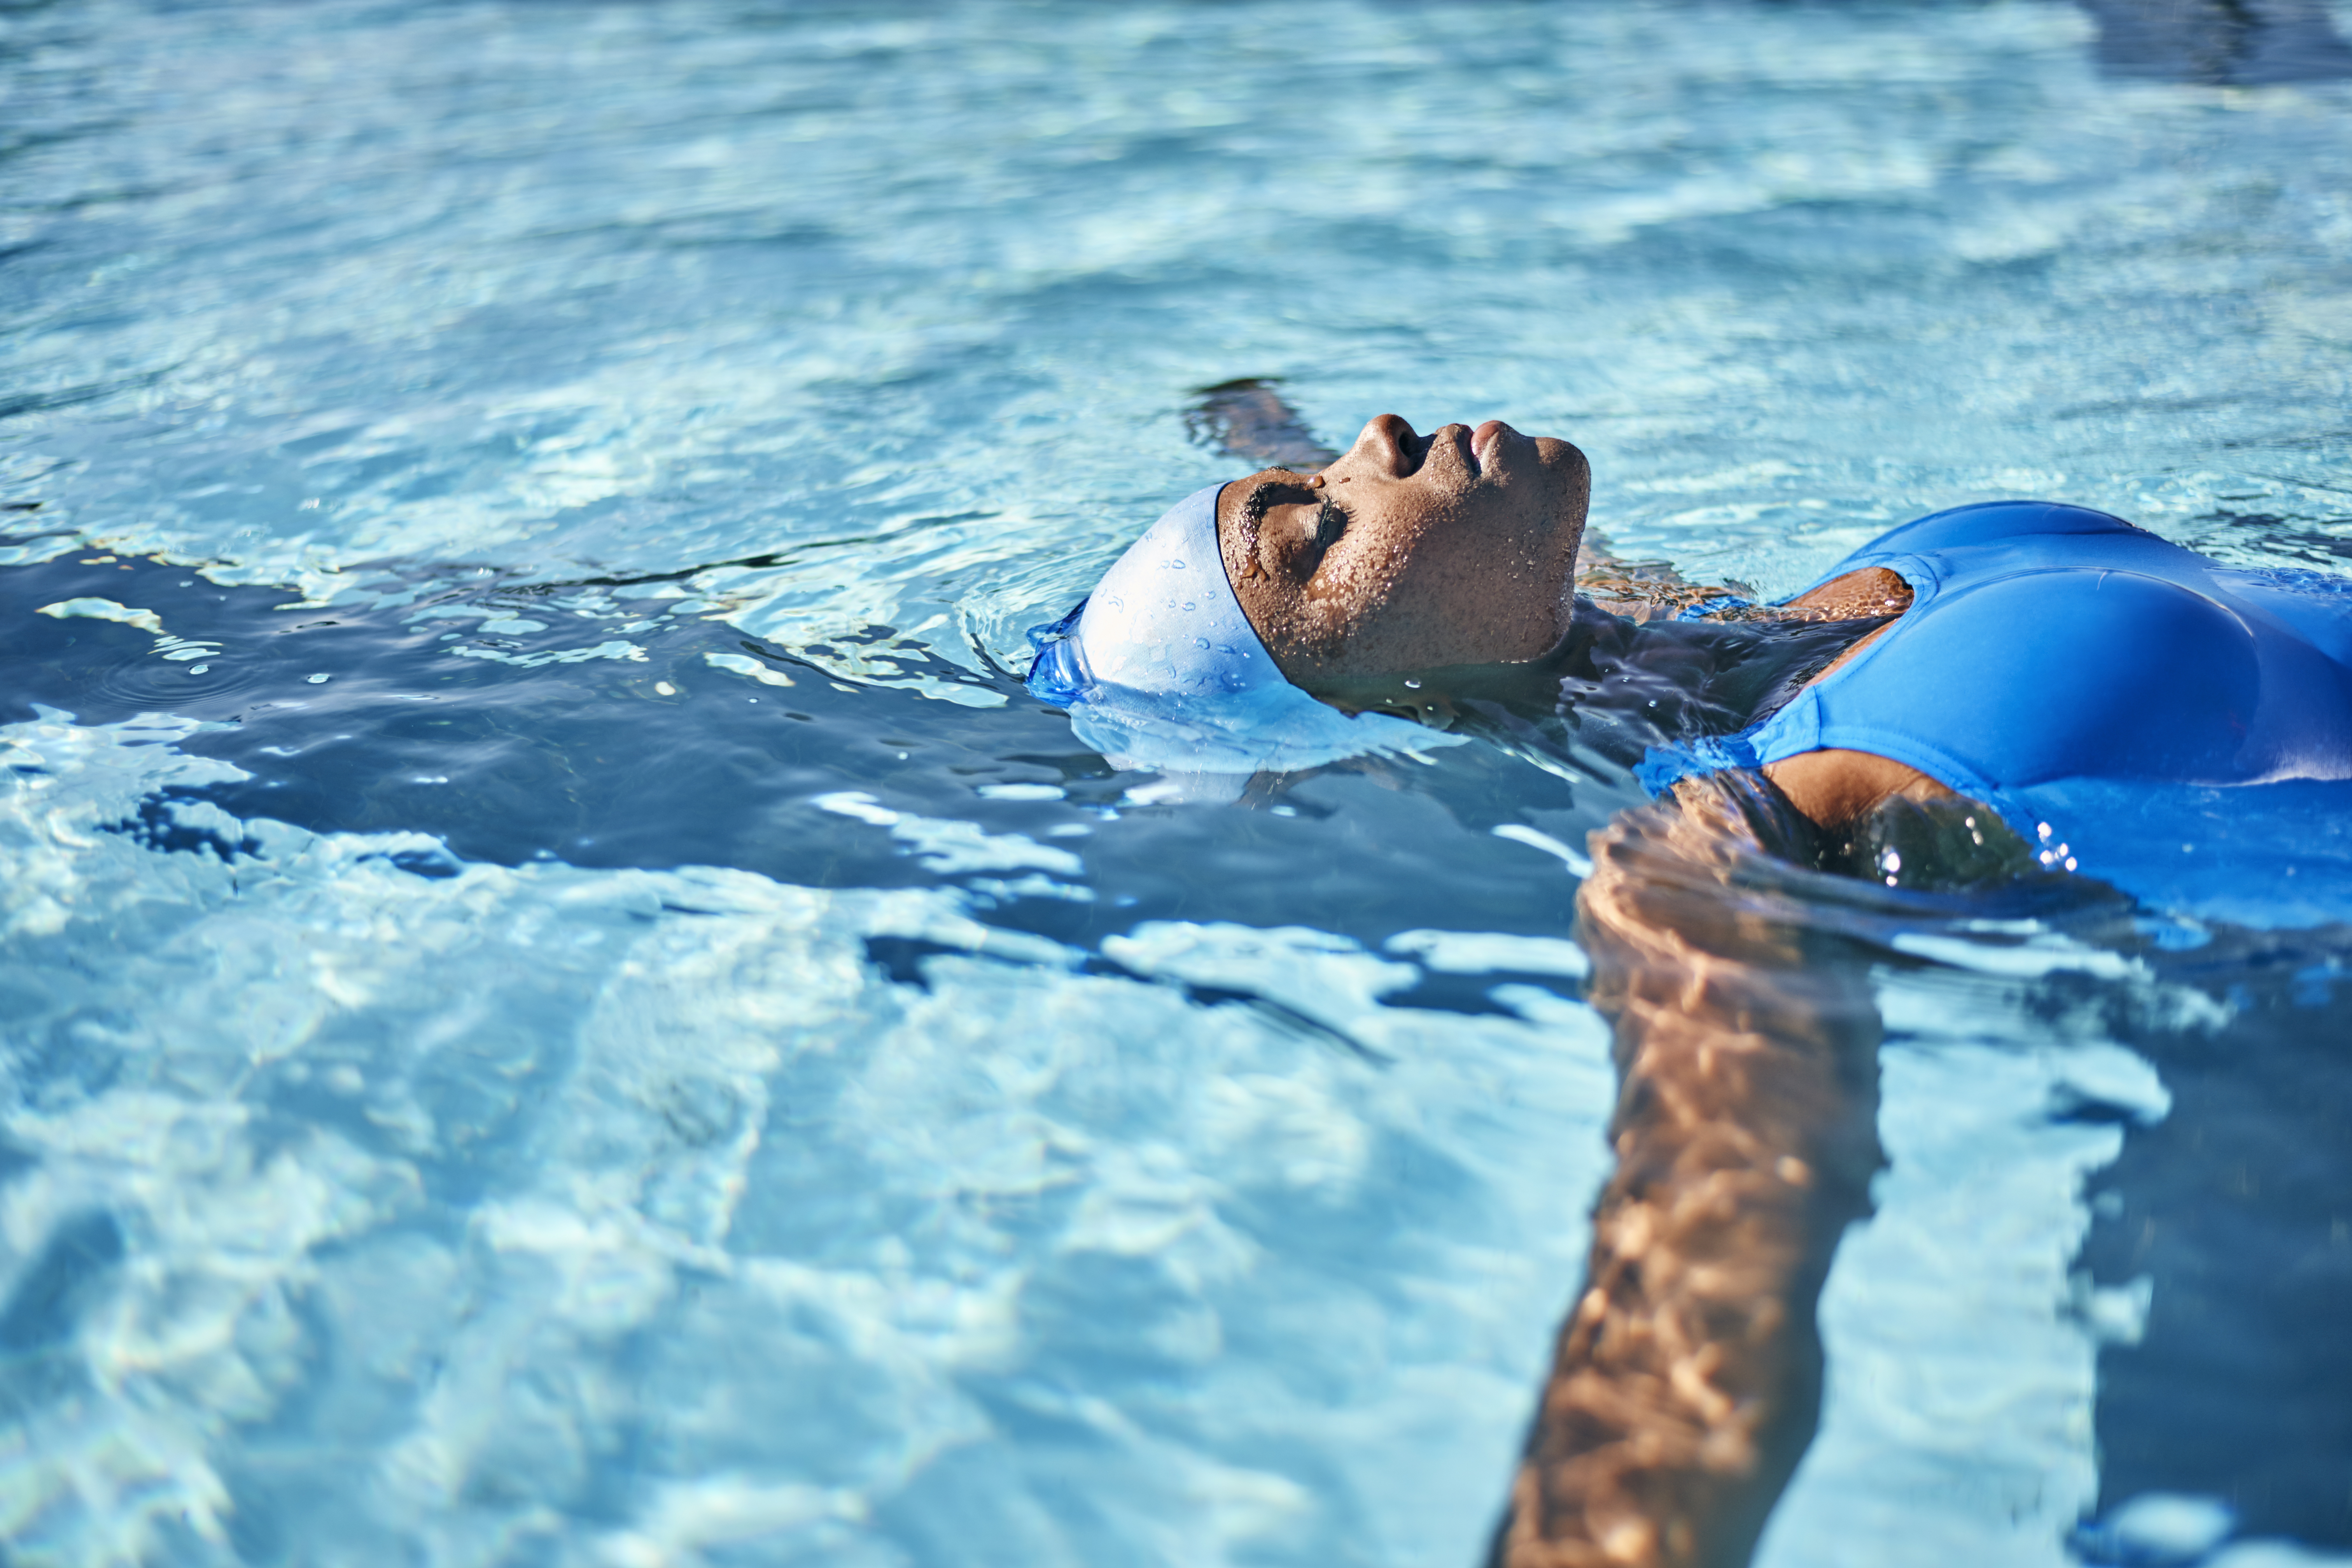 Pool time: How to protect against the side effects of chlorine